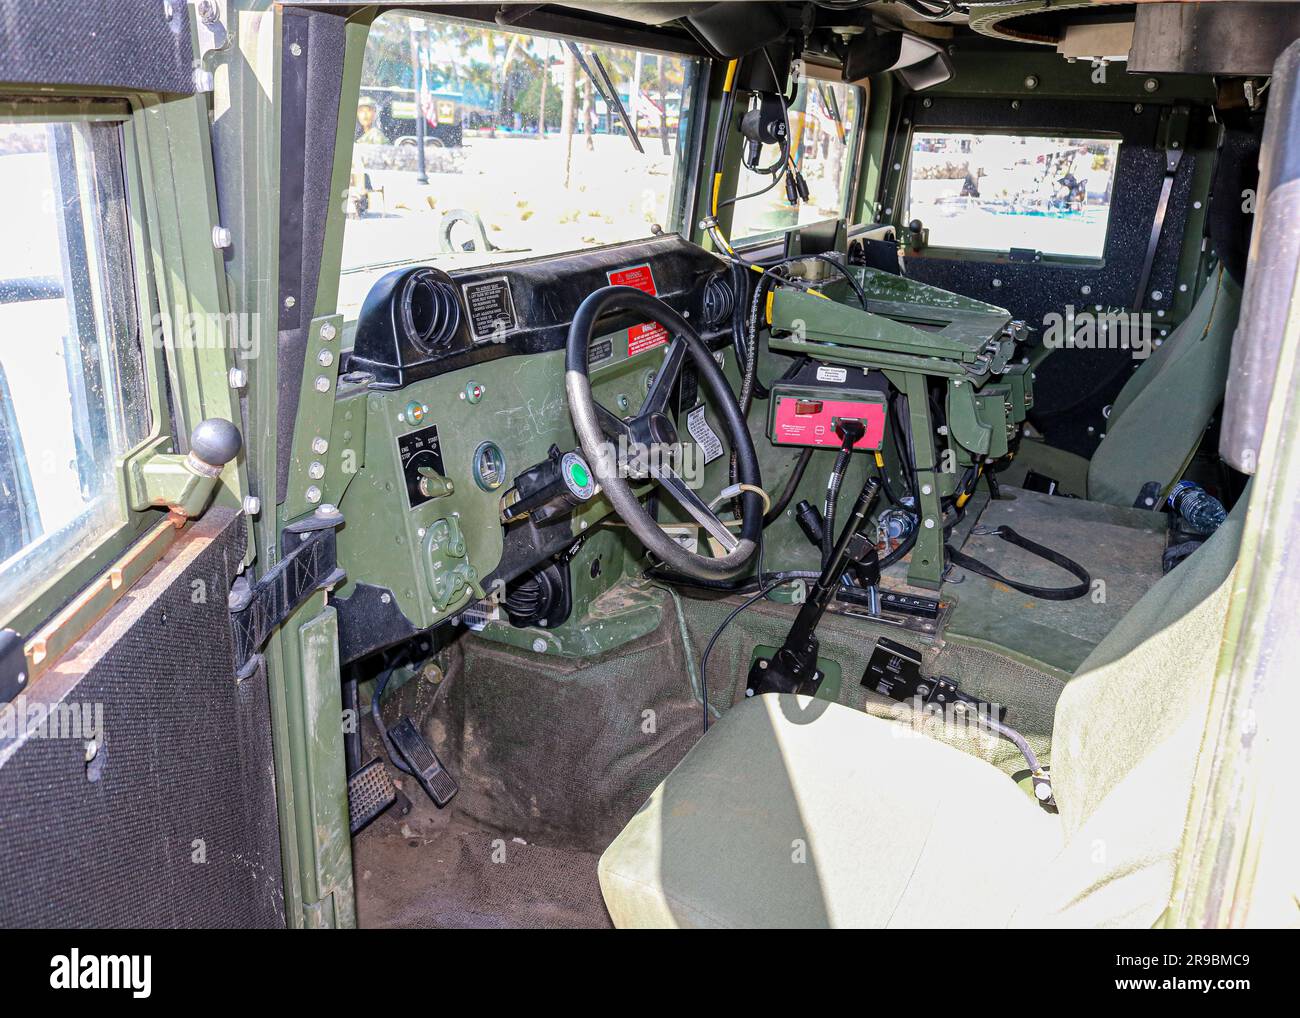 The interior of a military vehicle. Stock Photo